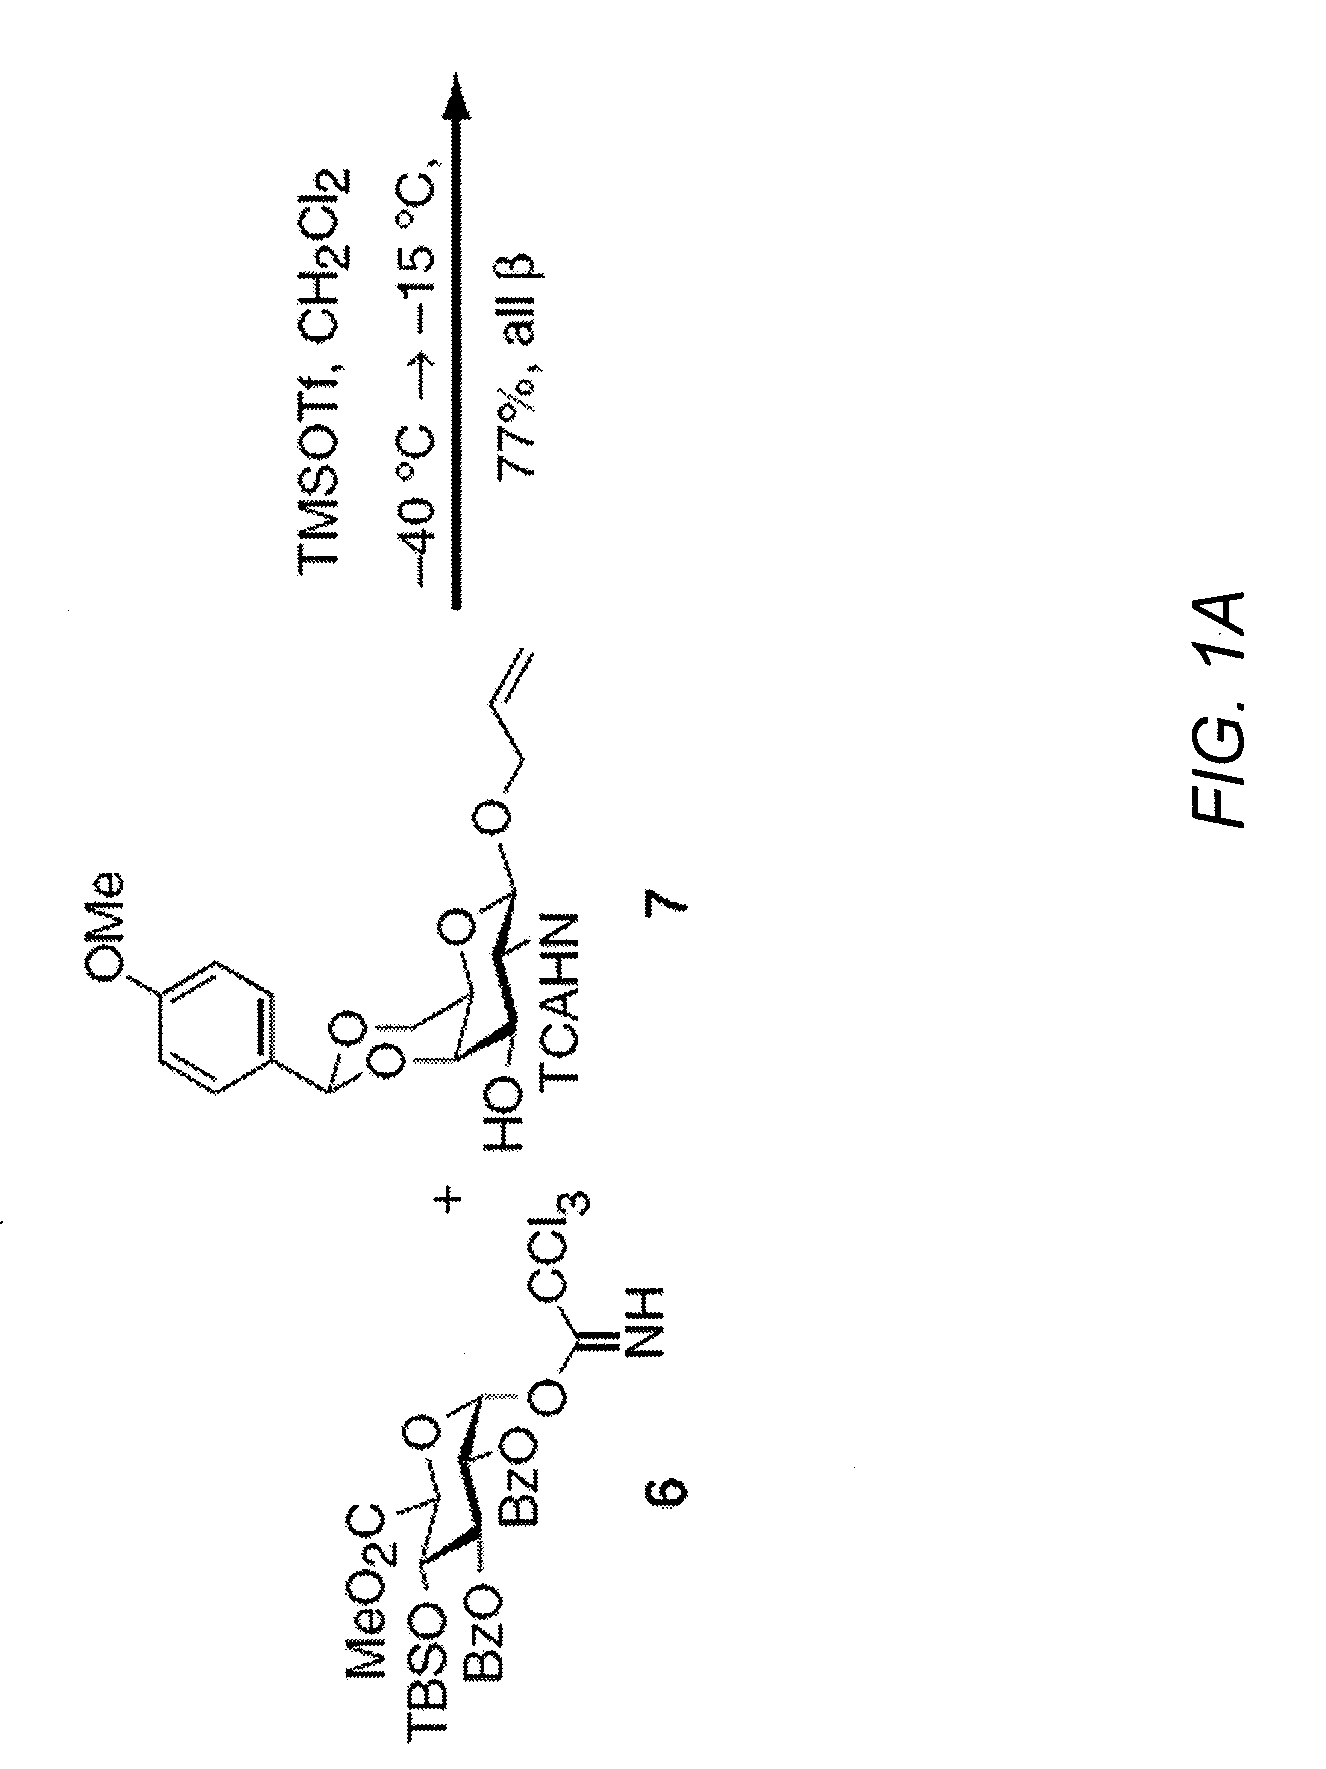 Chondroitin sulfate binding proteins and modulators thereof